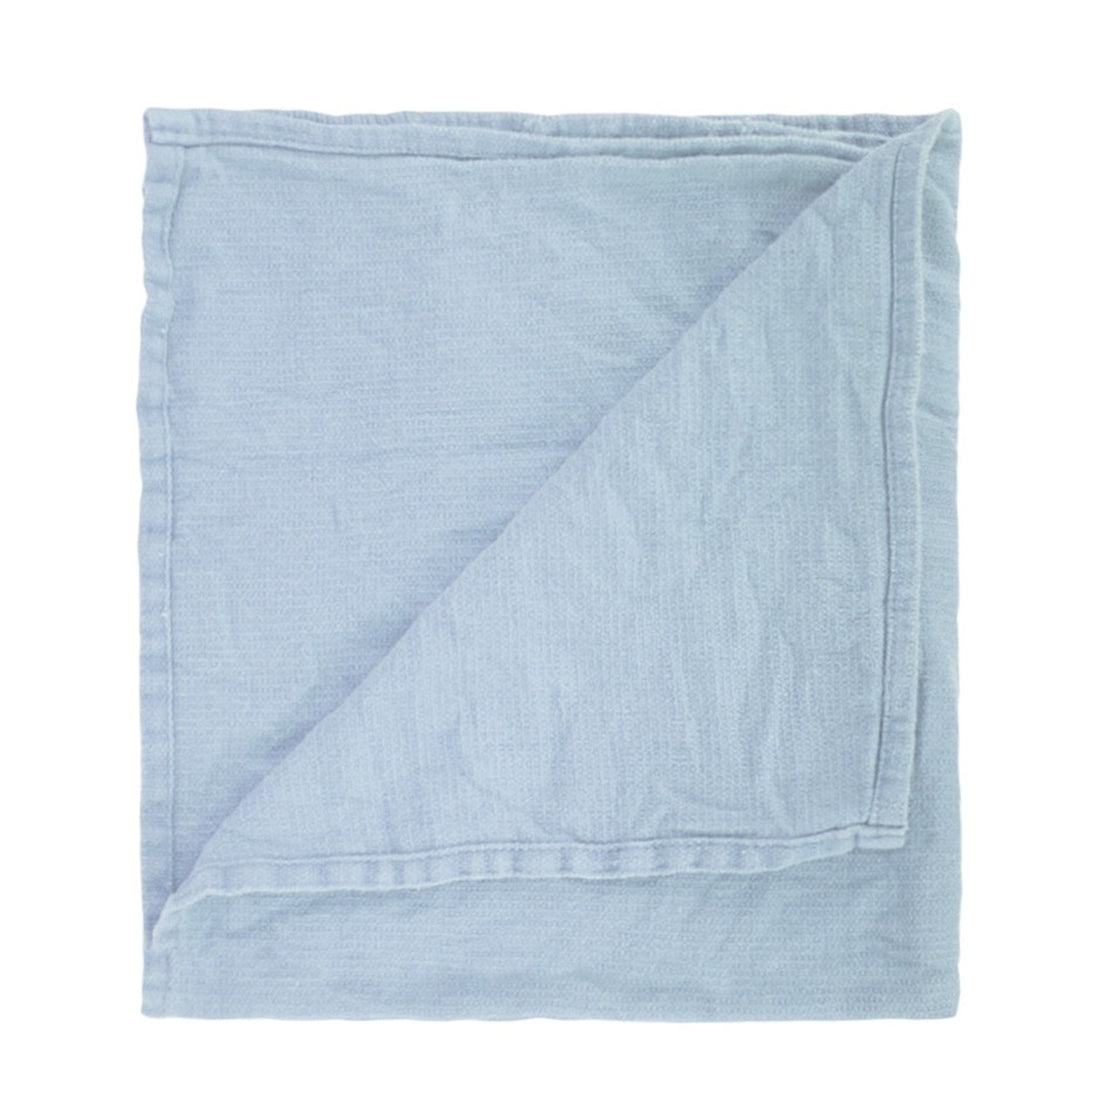 Towels New/Prewashed Blue, Towels, Window Cleaning Supplies & Tools